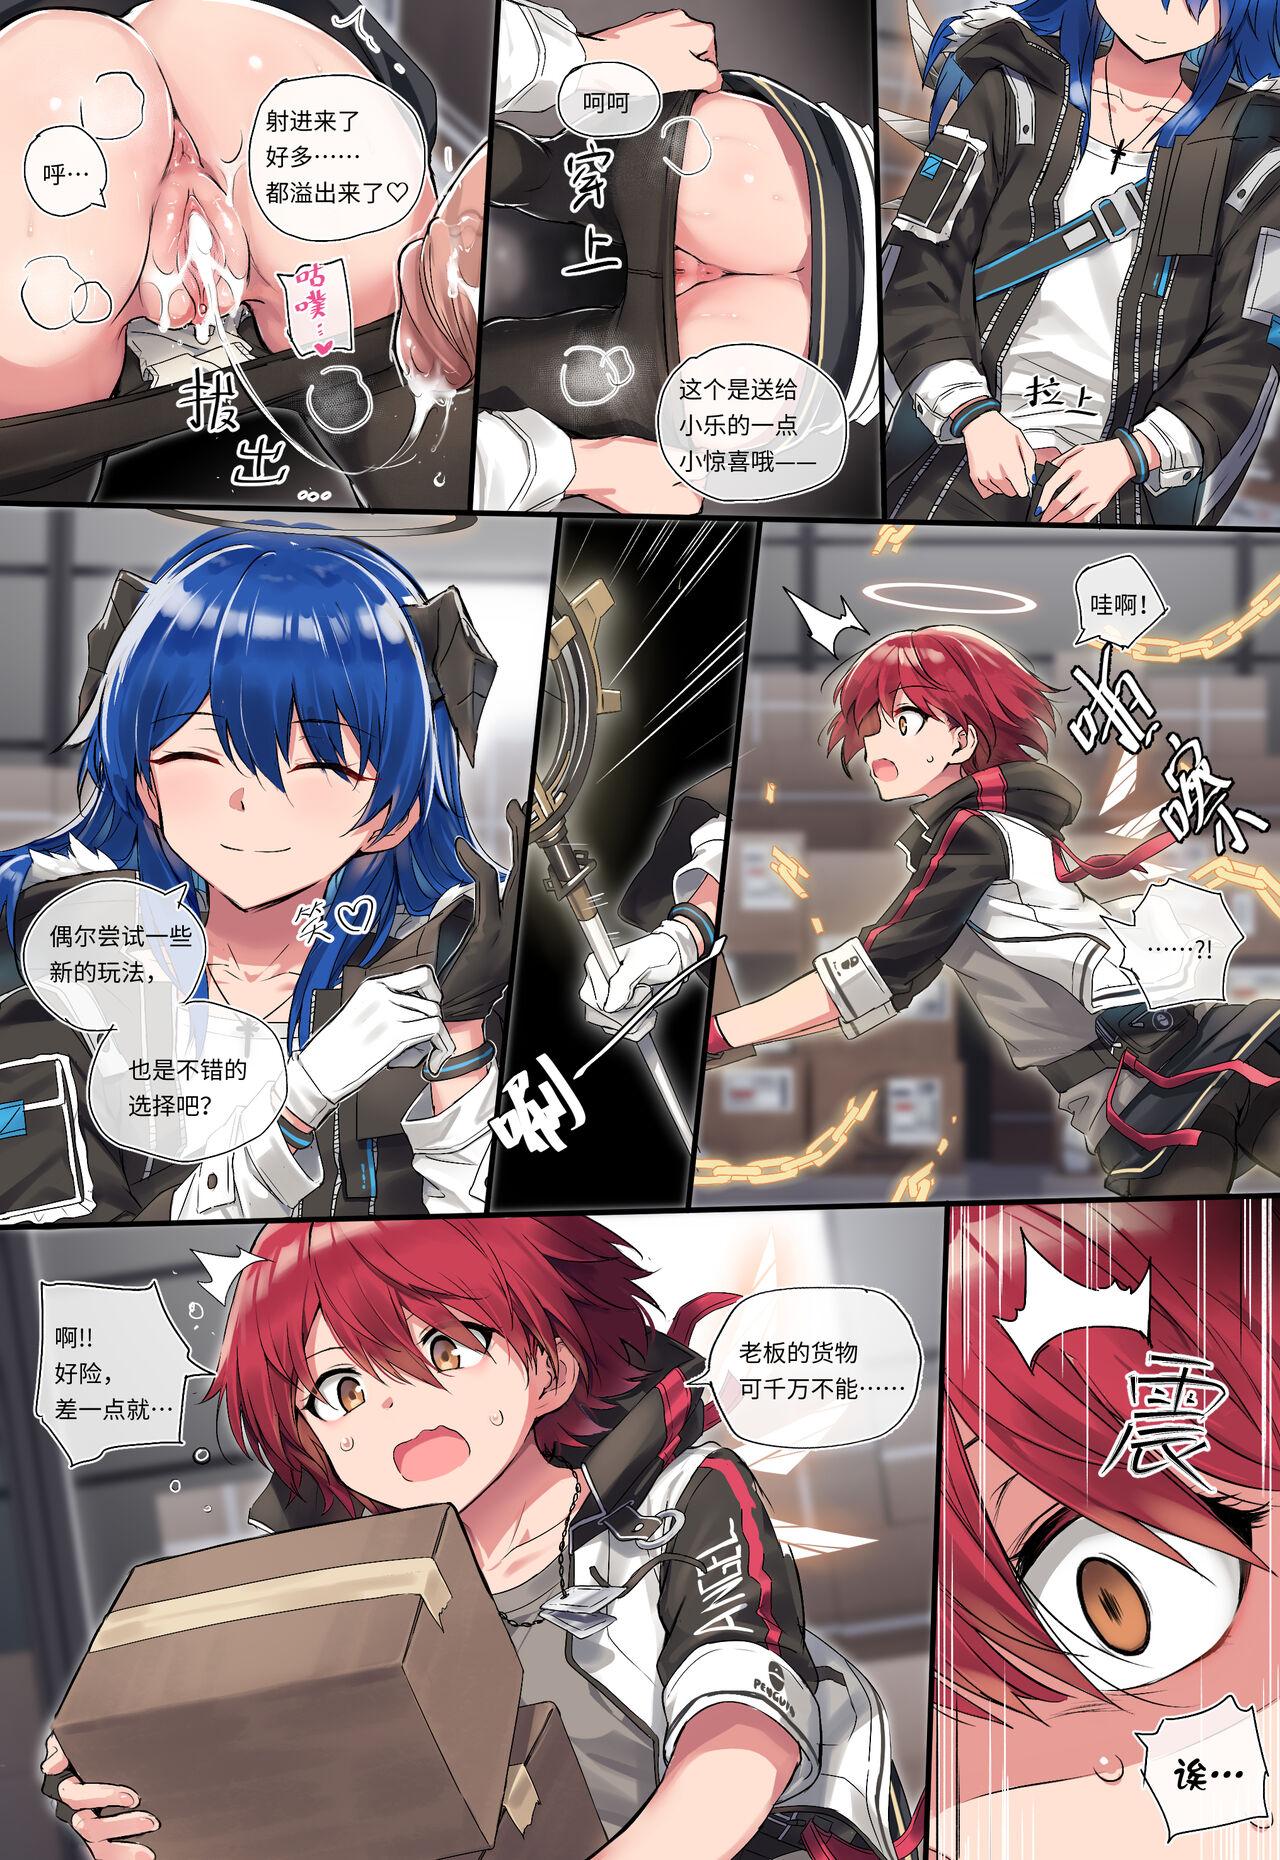 Gay Facial 莫能的时停play~【旧作重传】（无修正） - Arknights Ass To Mouth - Page 9